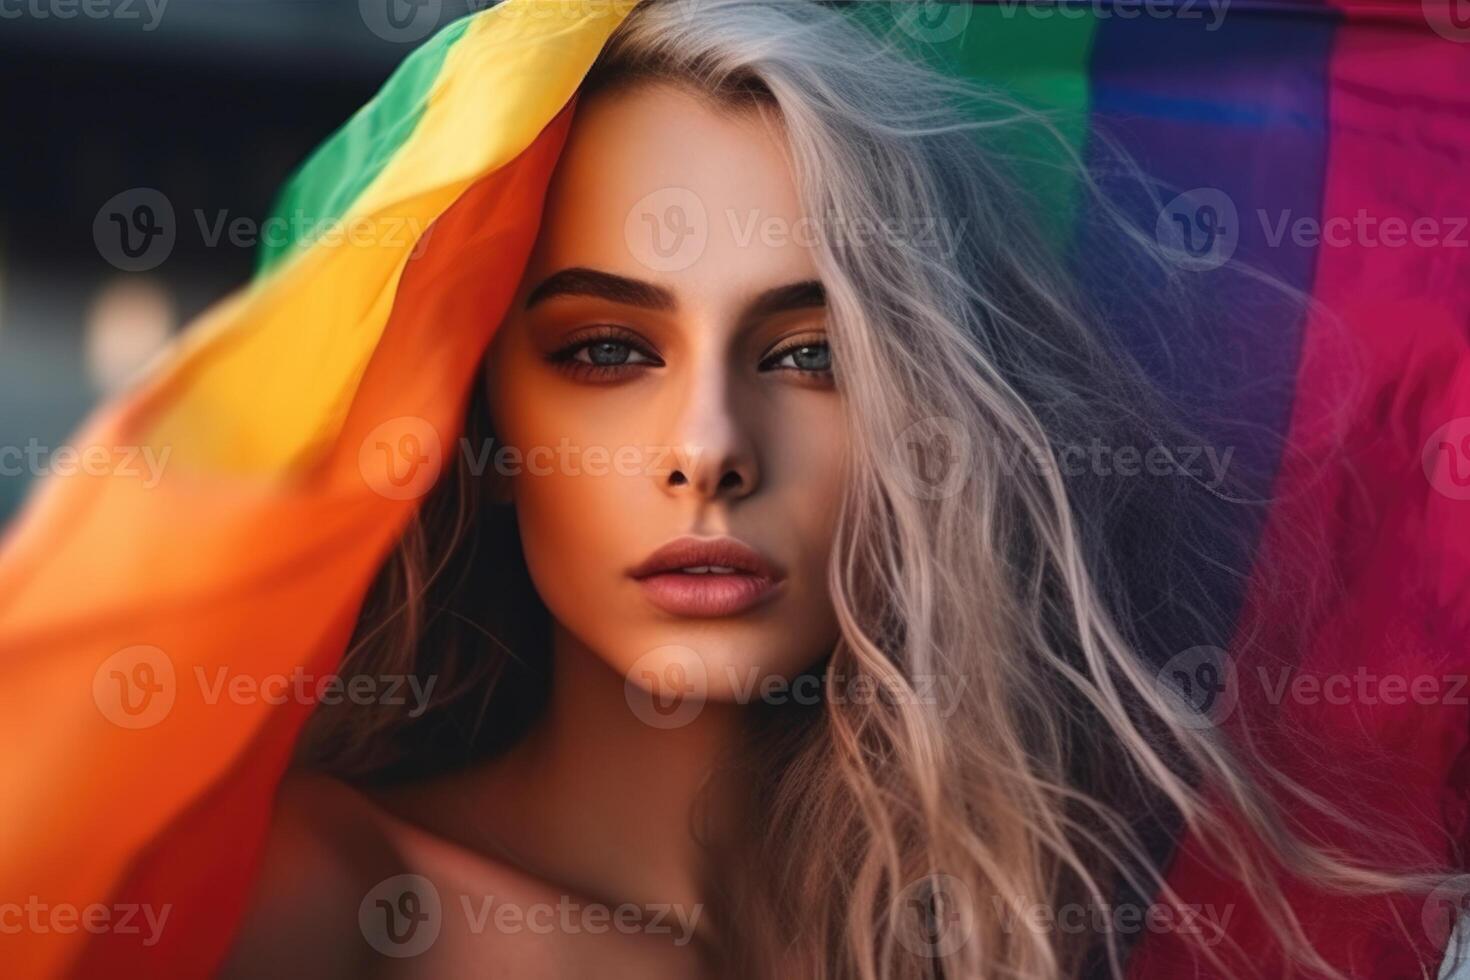 happy young woman holding LGBTQ flag over head. photo